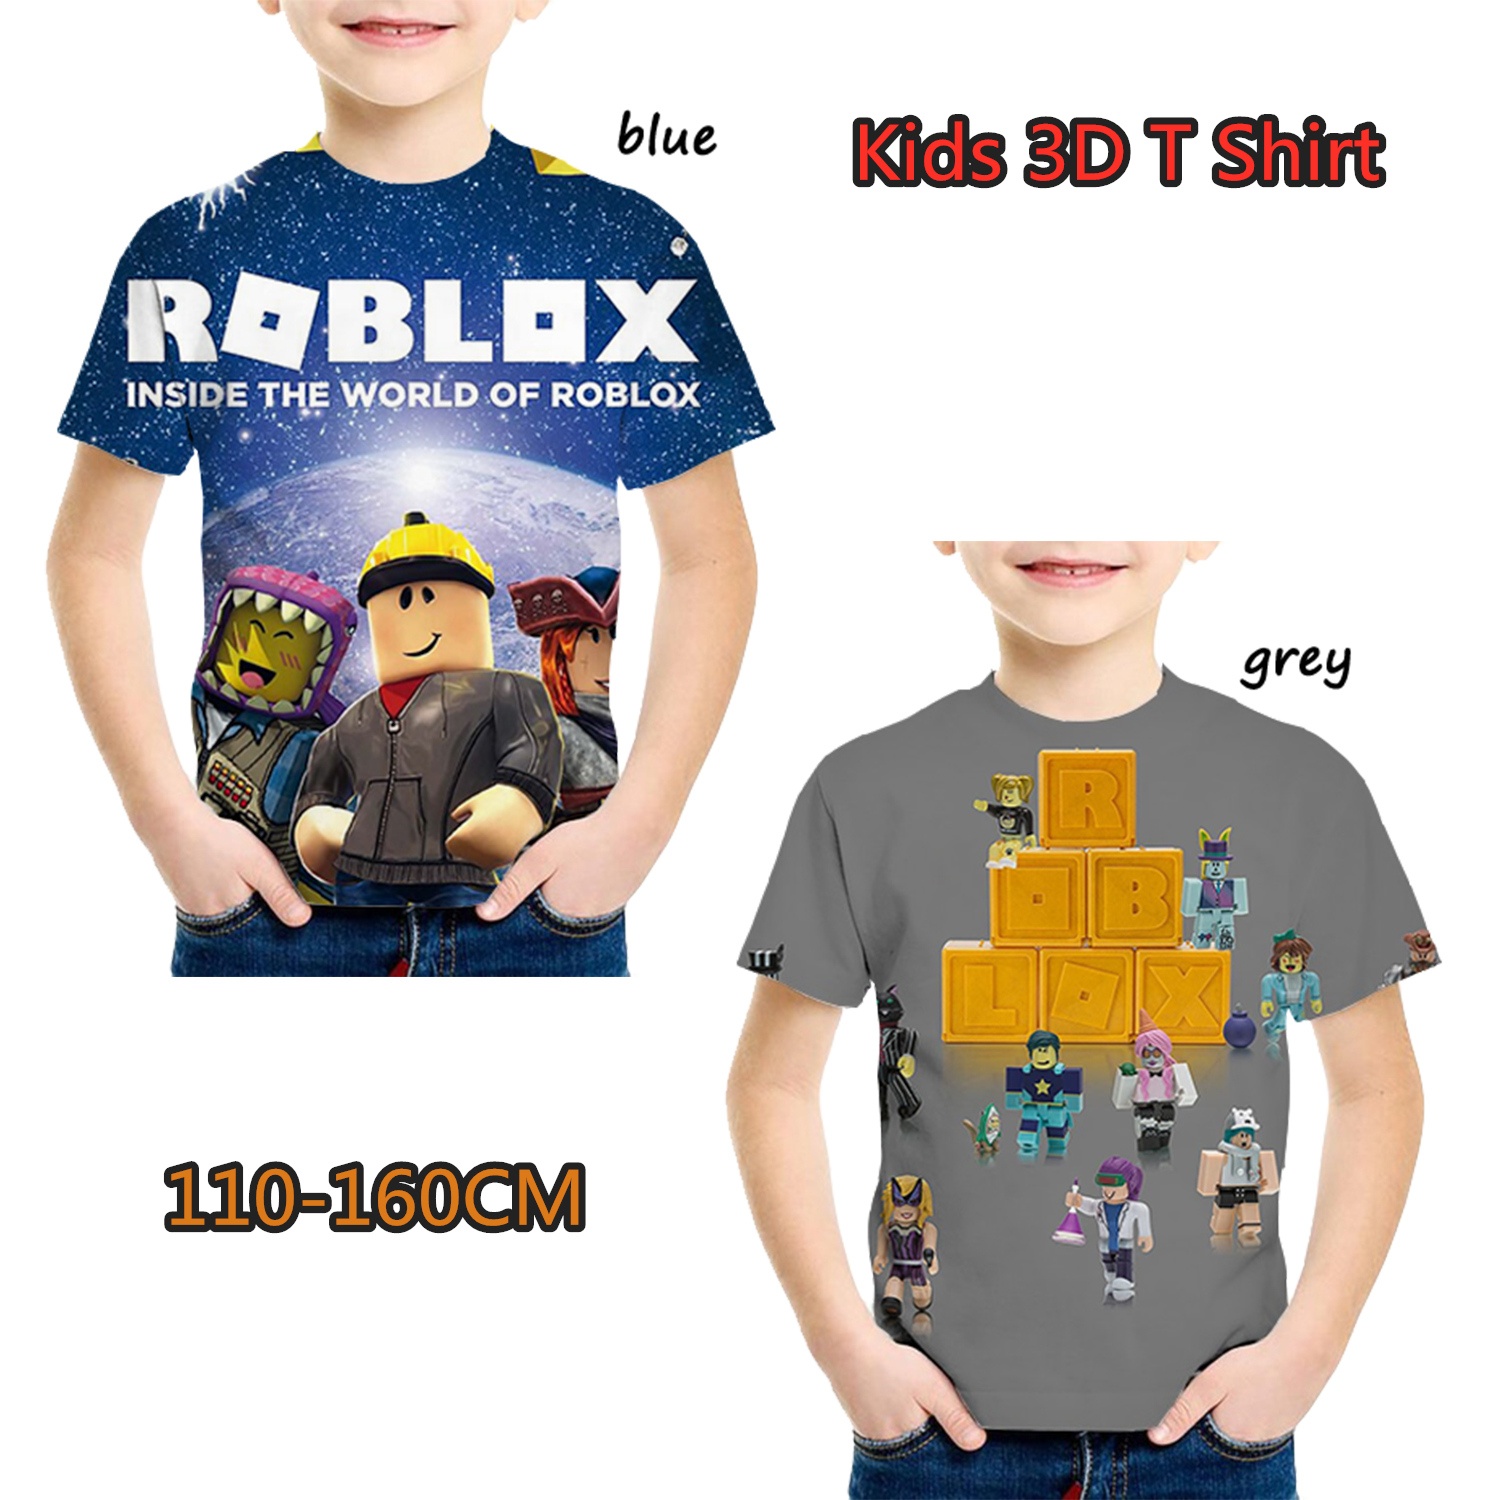 Fashion Cartoon Roblox 3d Printed Kids T Shirt Boys And Girls Funny Short Sleeve Round Neck Tees Wish - 2019 3 style boys girls roblox stardust ethical t shirts 2019 new children cartoon game cotton short sleeve t shirt baby kids clothing c23 from